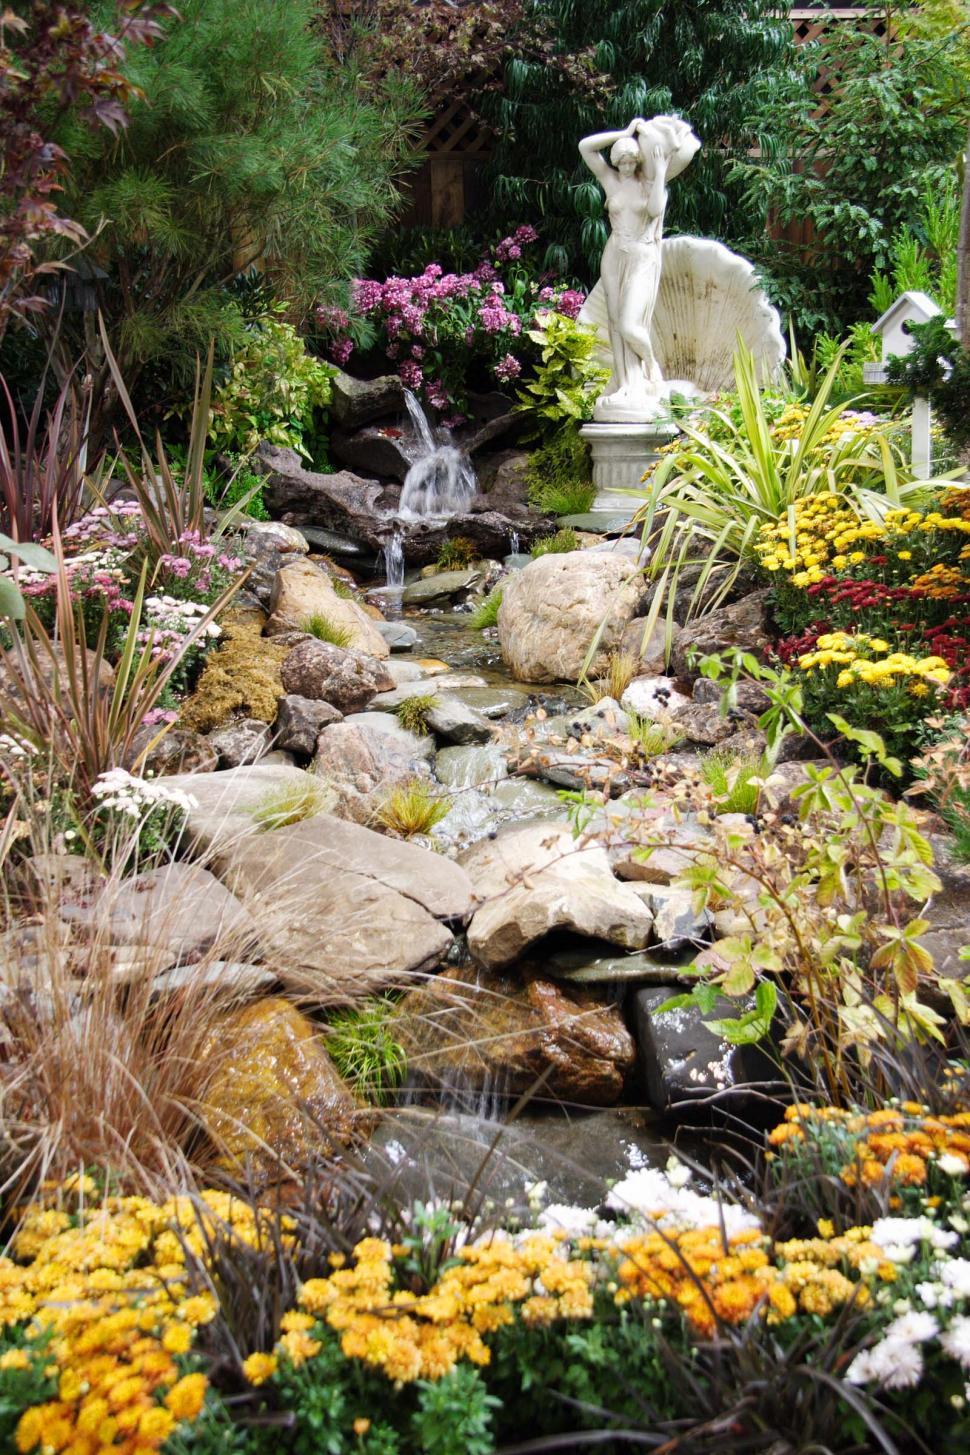 Free Image of Statue and Fountain - Man-Made Garden 